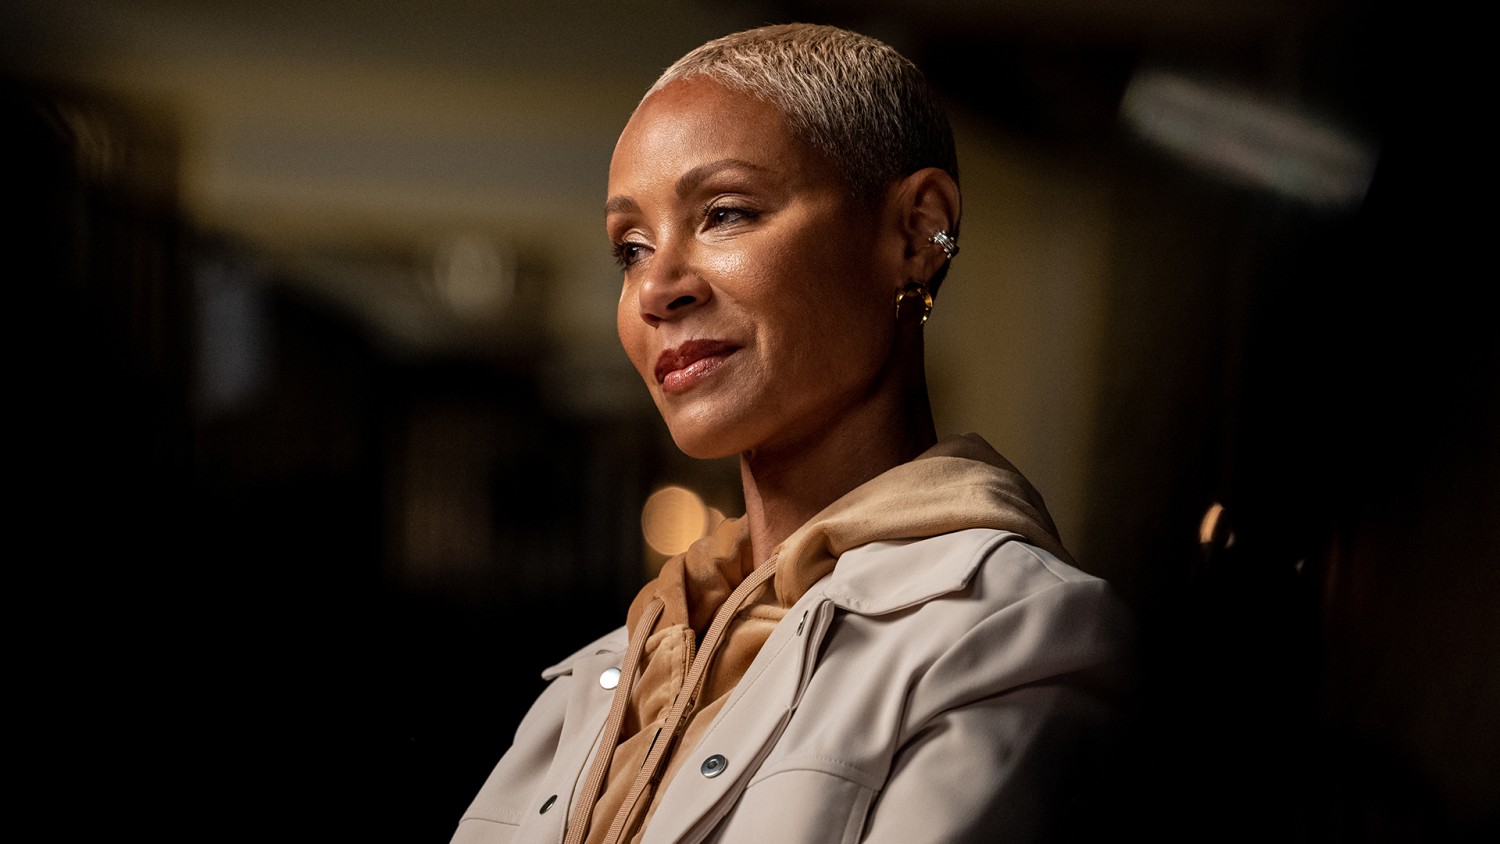 Jada Pinkett Smith and Will Smith are separated, 'Today' show